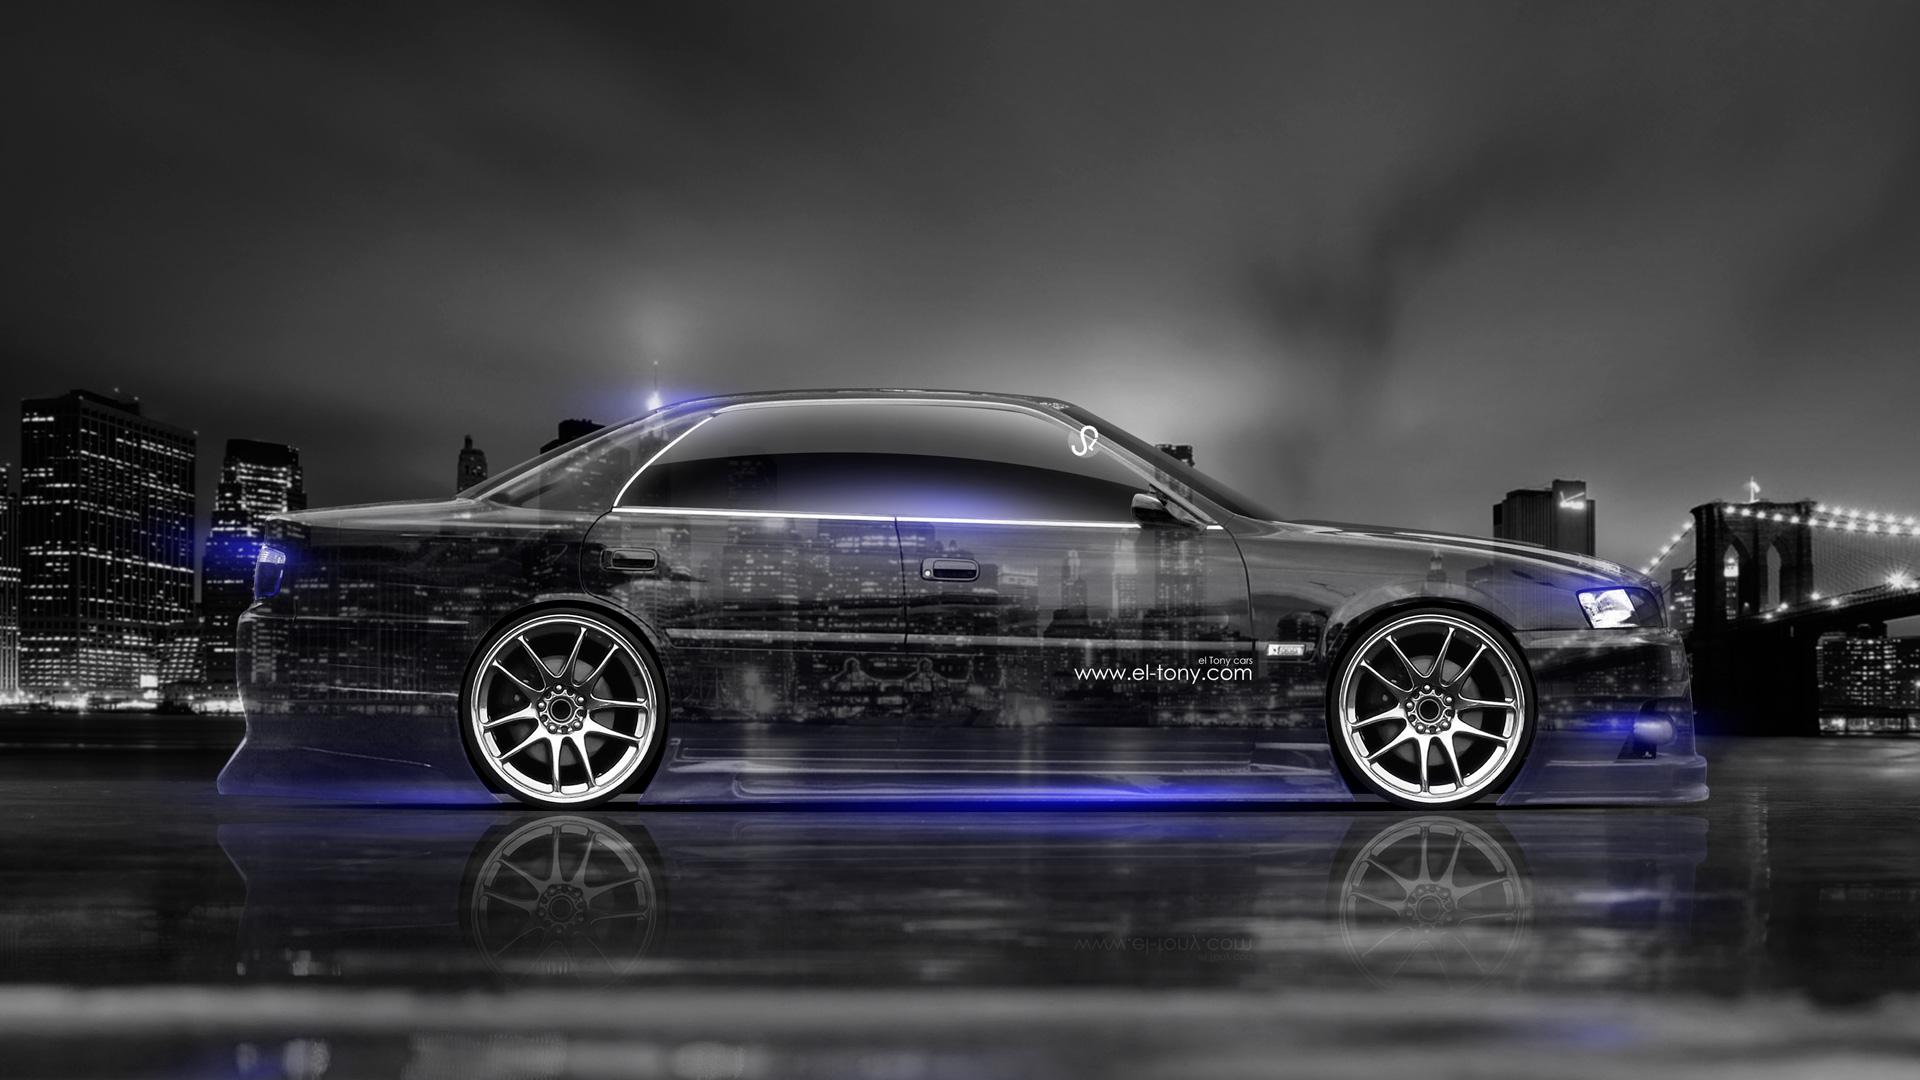 Toyota Chaser JZX100 JDM Side Crystal City Car 2014